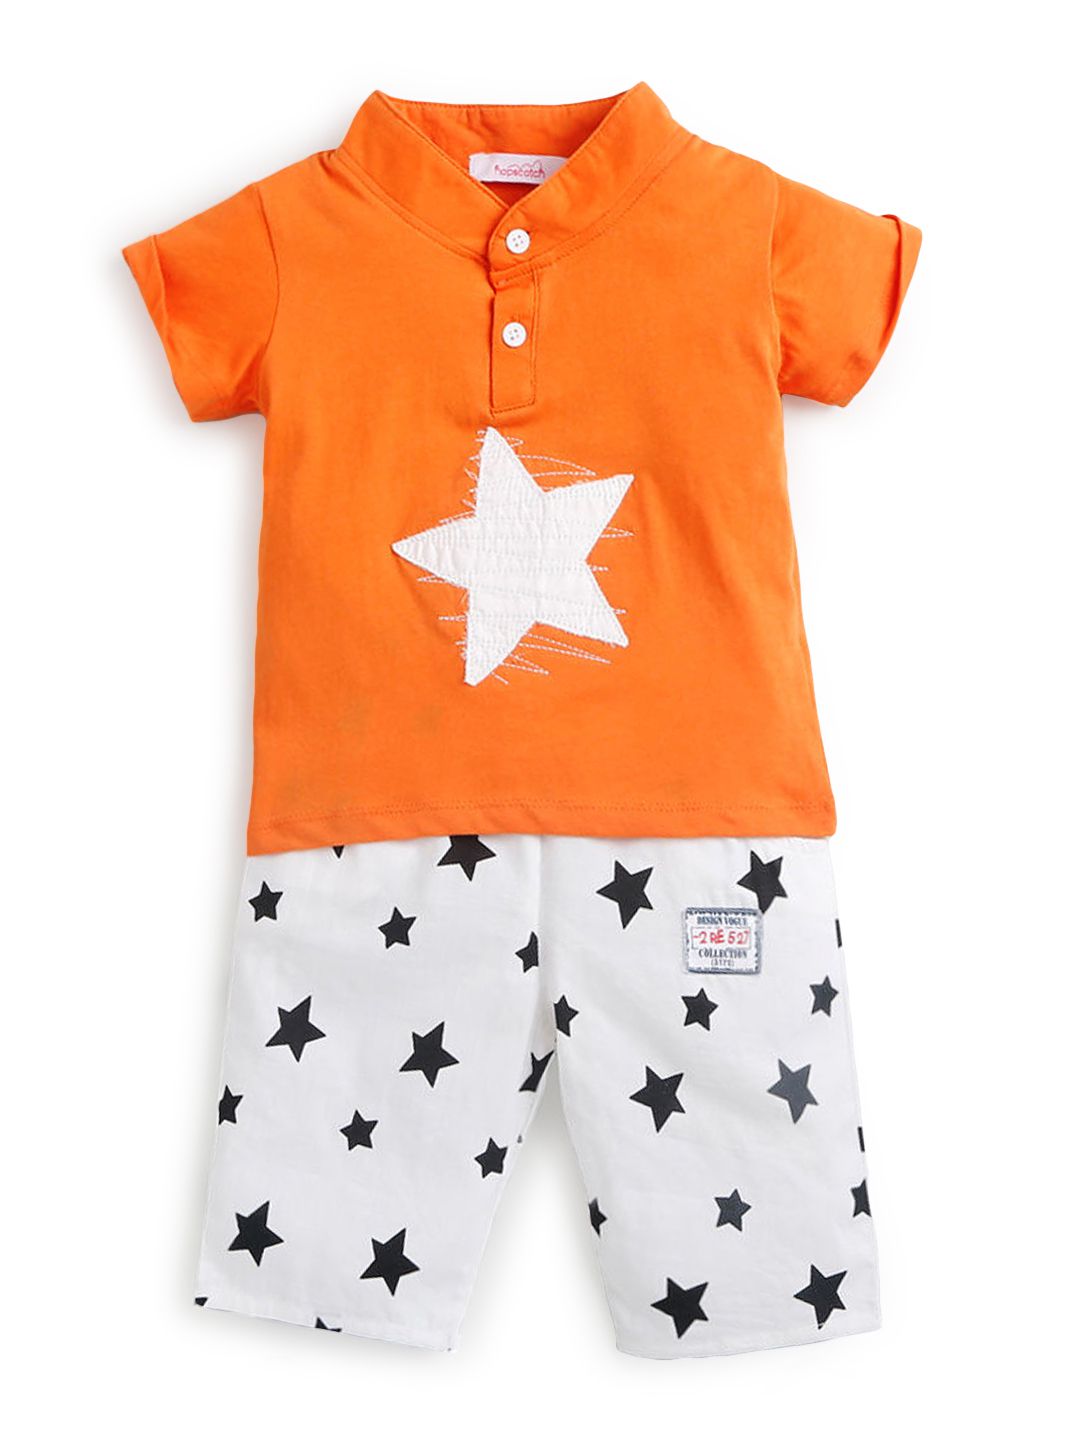 Hopscotch Boys Cotton and Spandex T-Shirt And Pant Sets in Orange Color For Ages 2-3 Years (BCC-2383925)